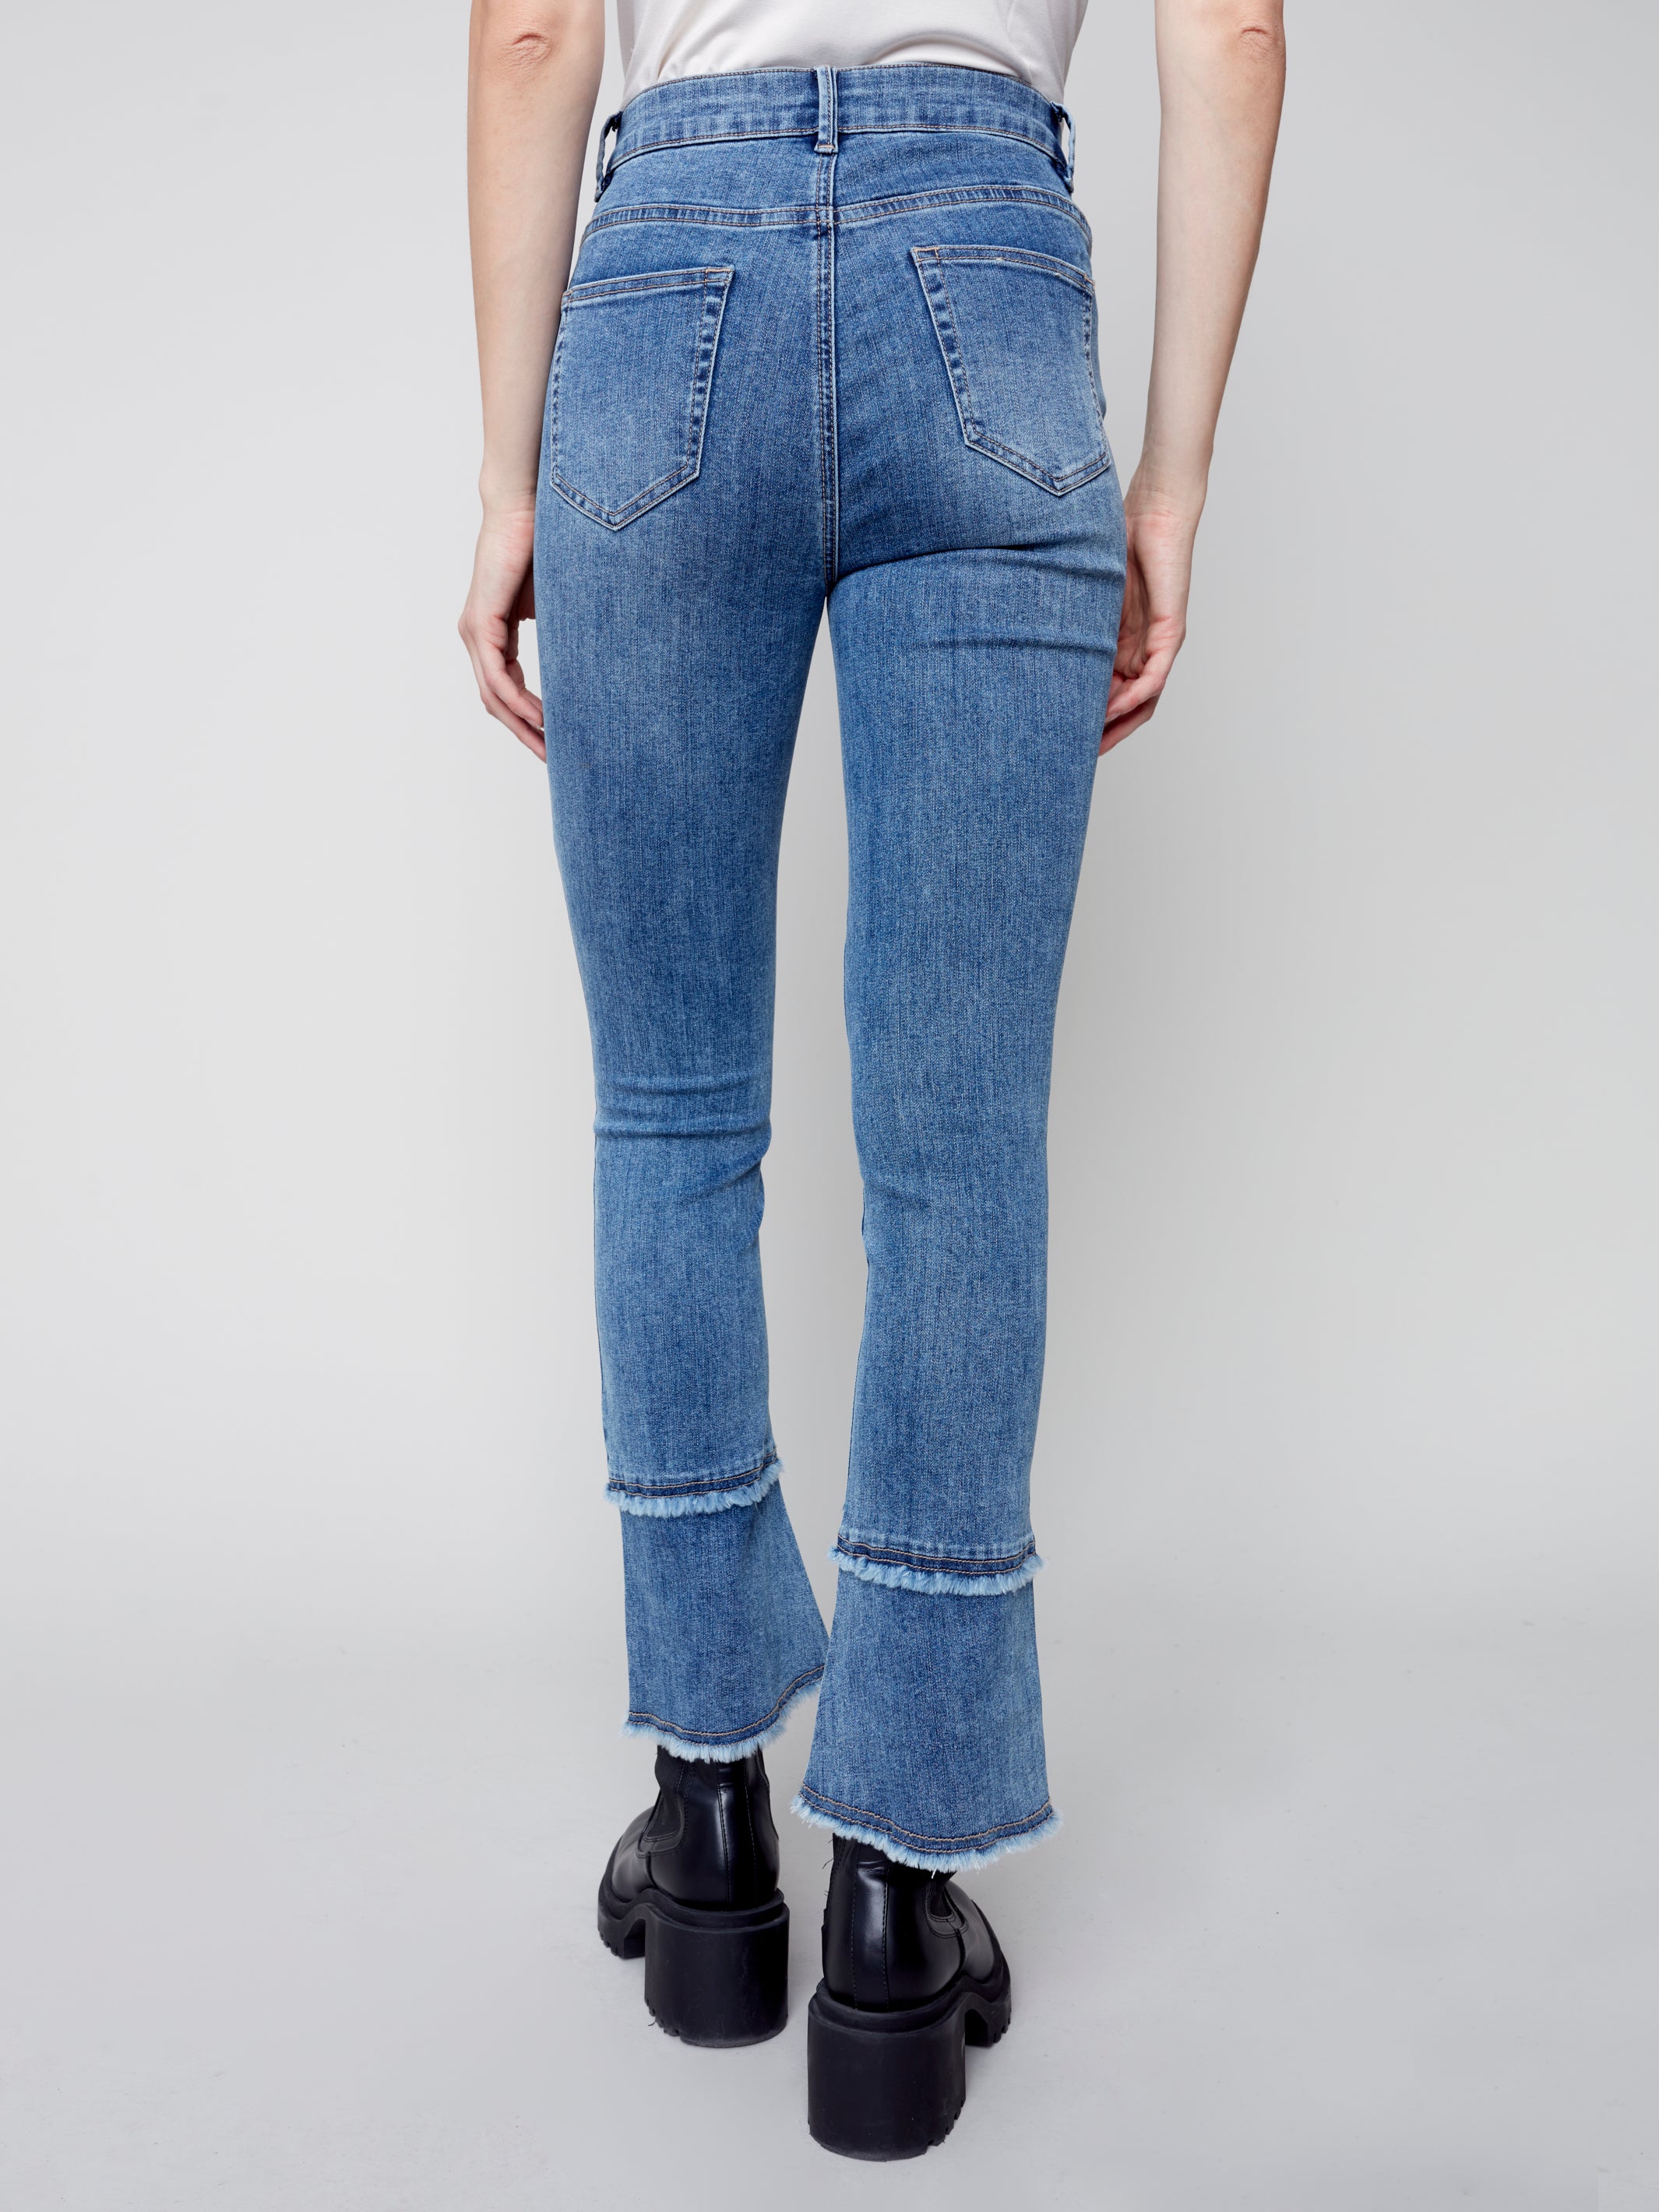 Double Fringe Bootcut Jeans by Charlie B